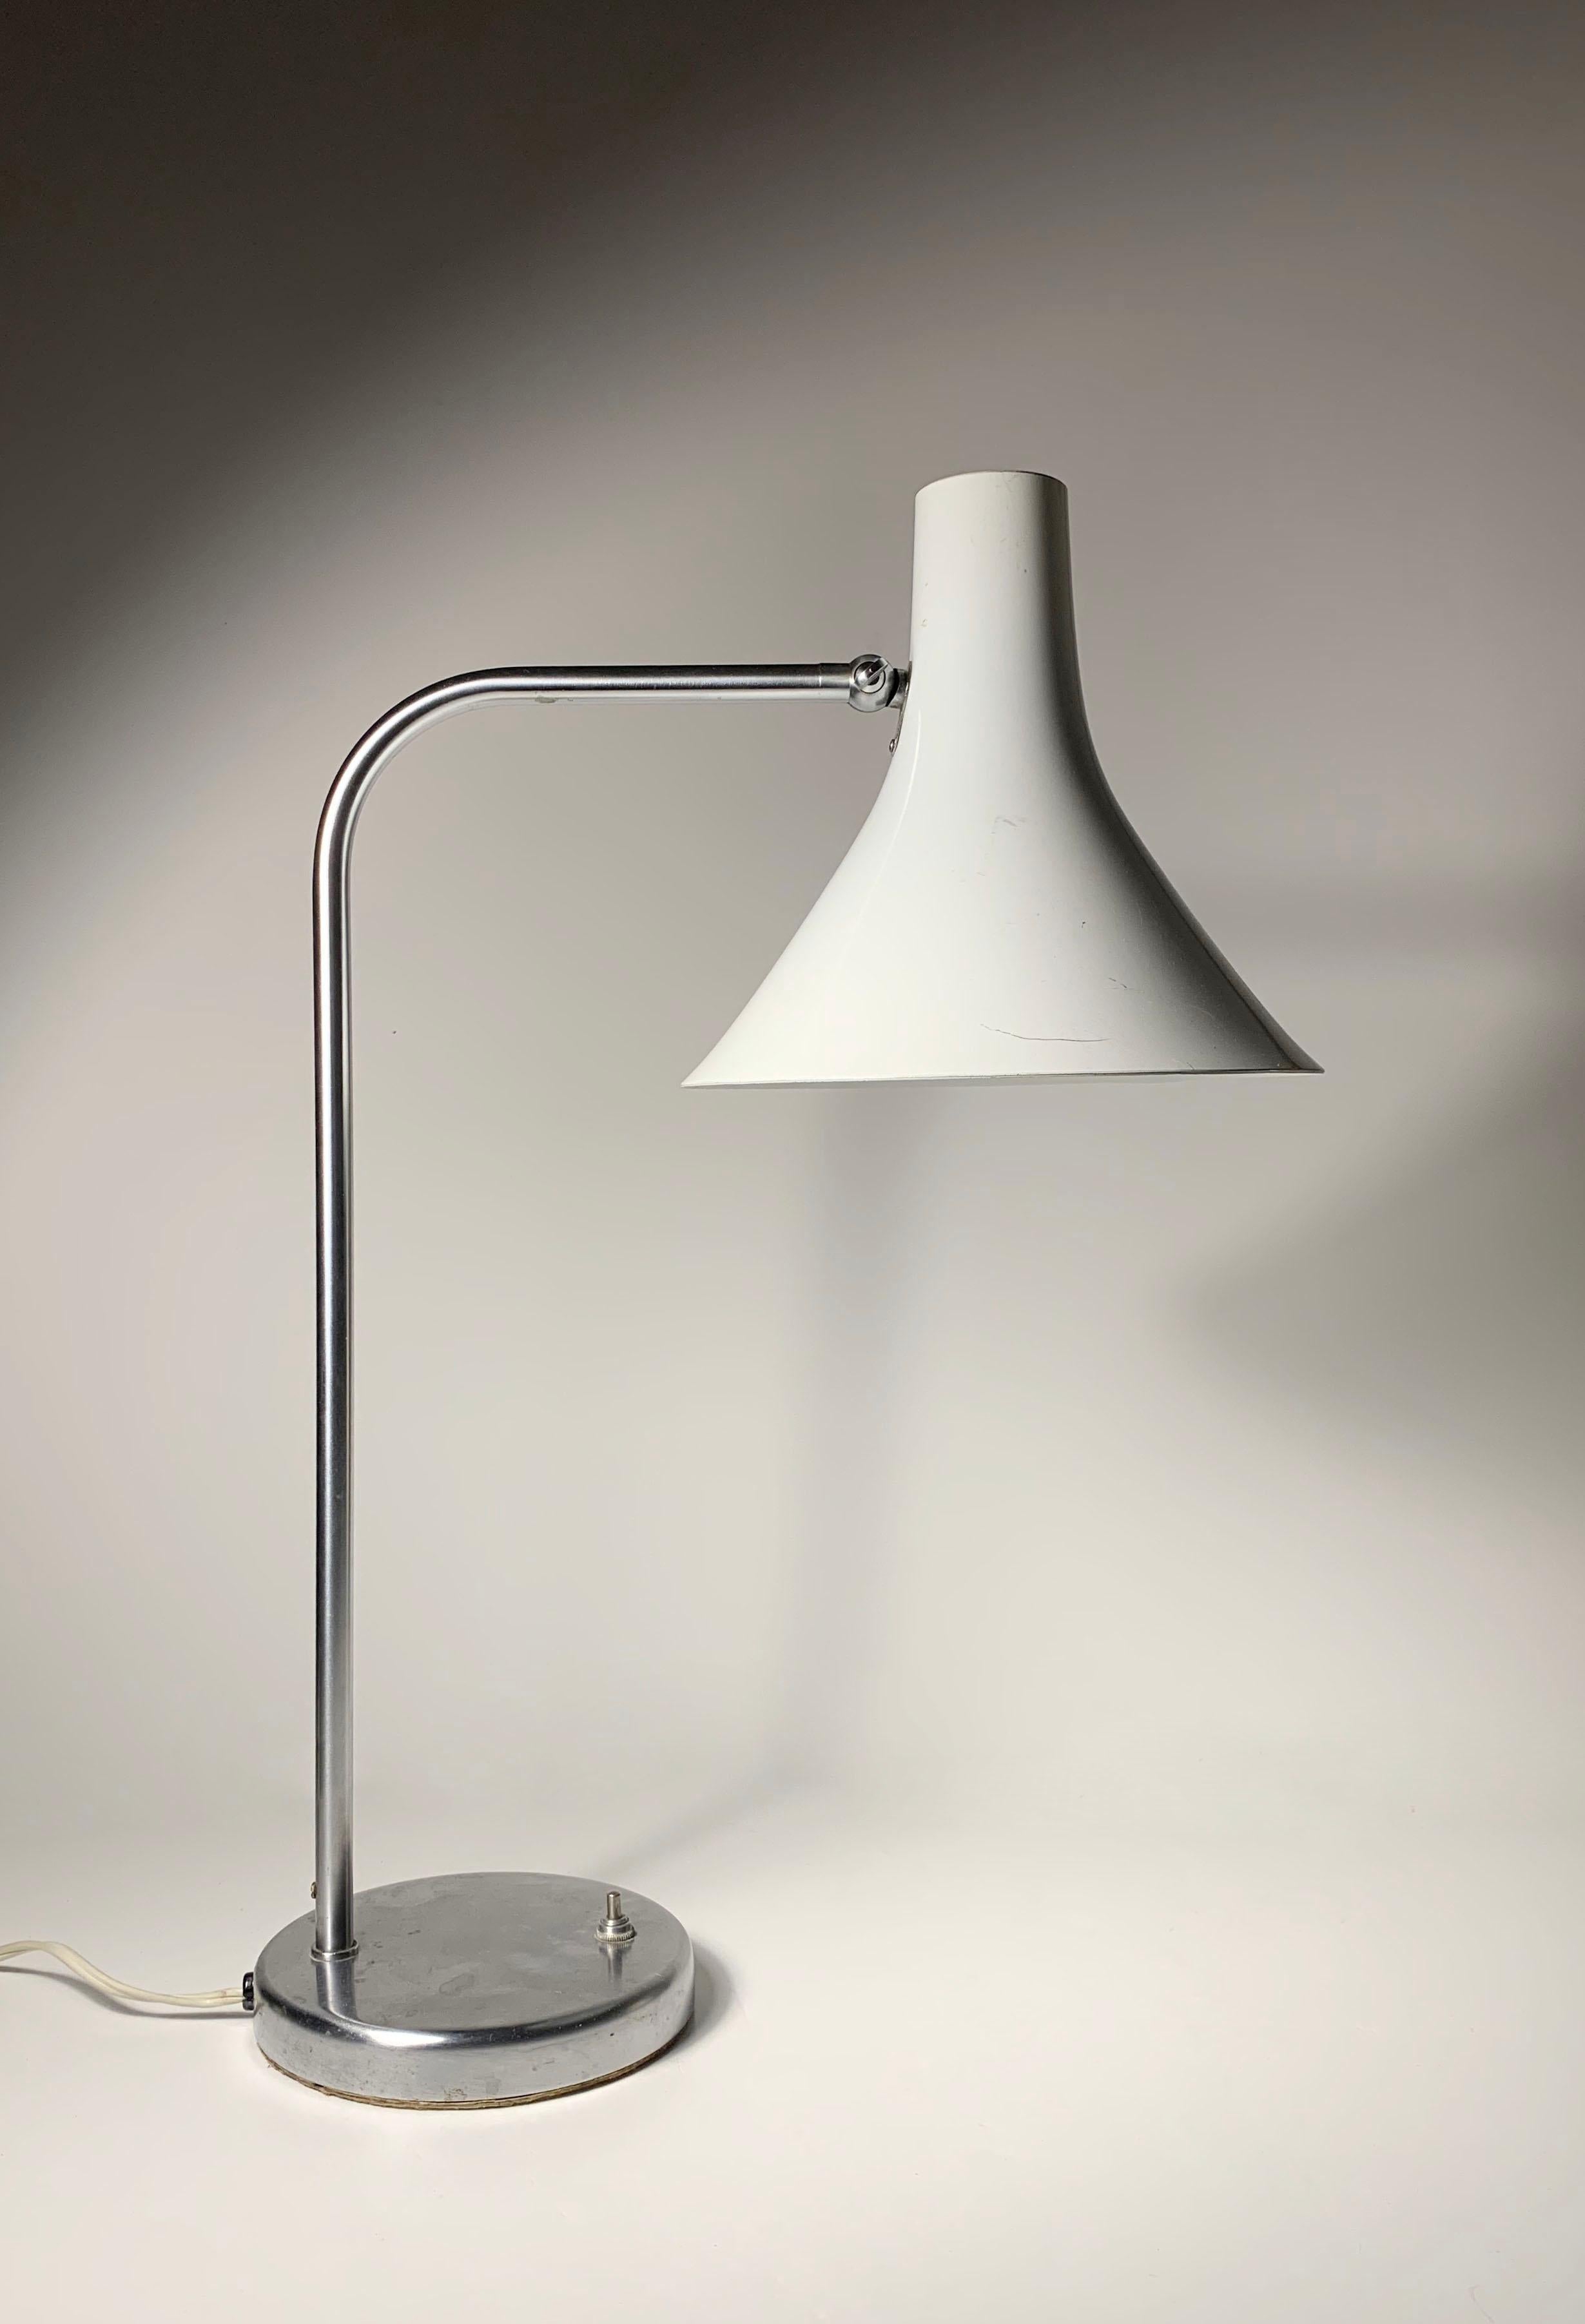 Vintage Greta Von Nessen Desk Lamp in understated Stainless Steel. The shade pivots up and down. And the staff rotates clockwise and counterclockwise (180 degrees). A very simple yet elegant lamp in both proportions and movement.

Some light wear